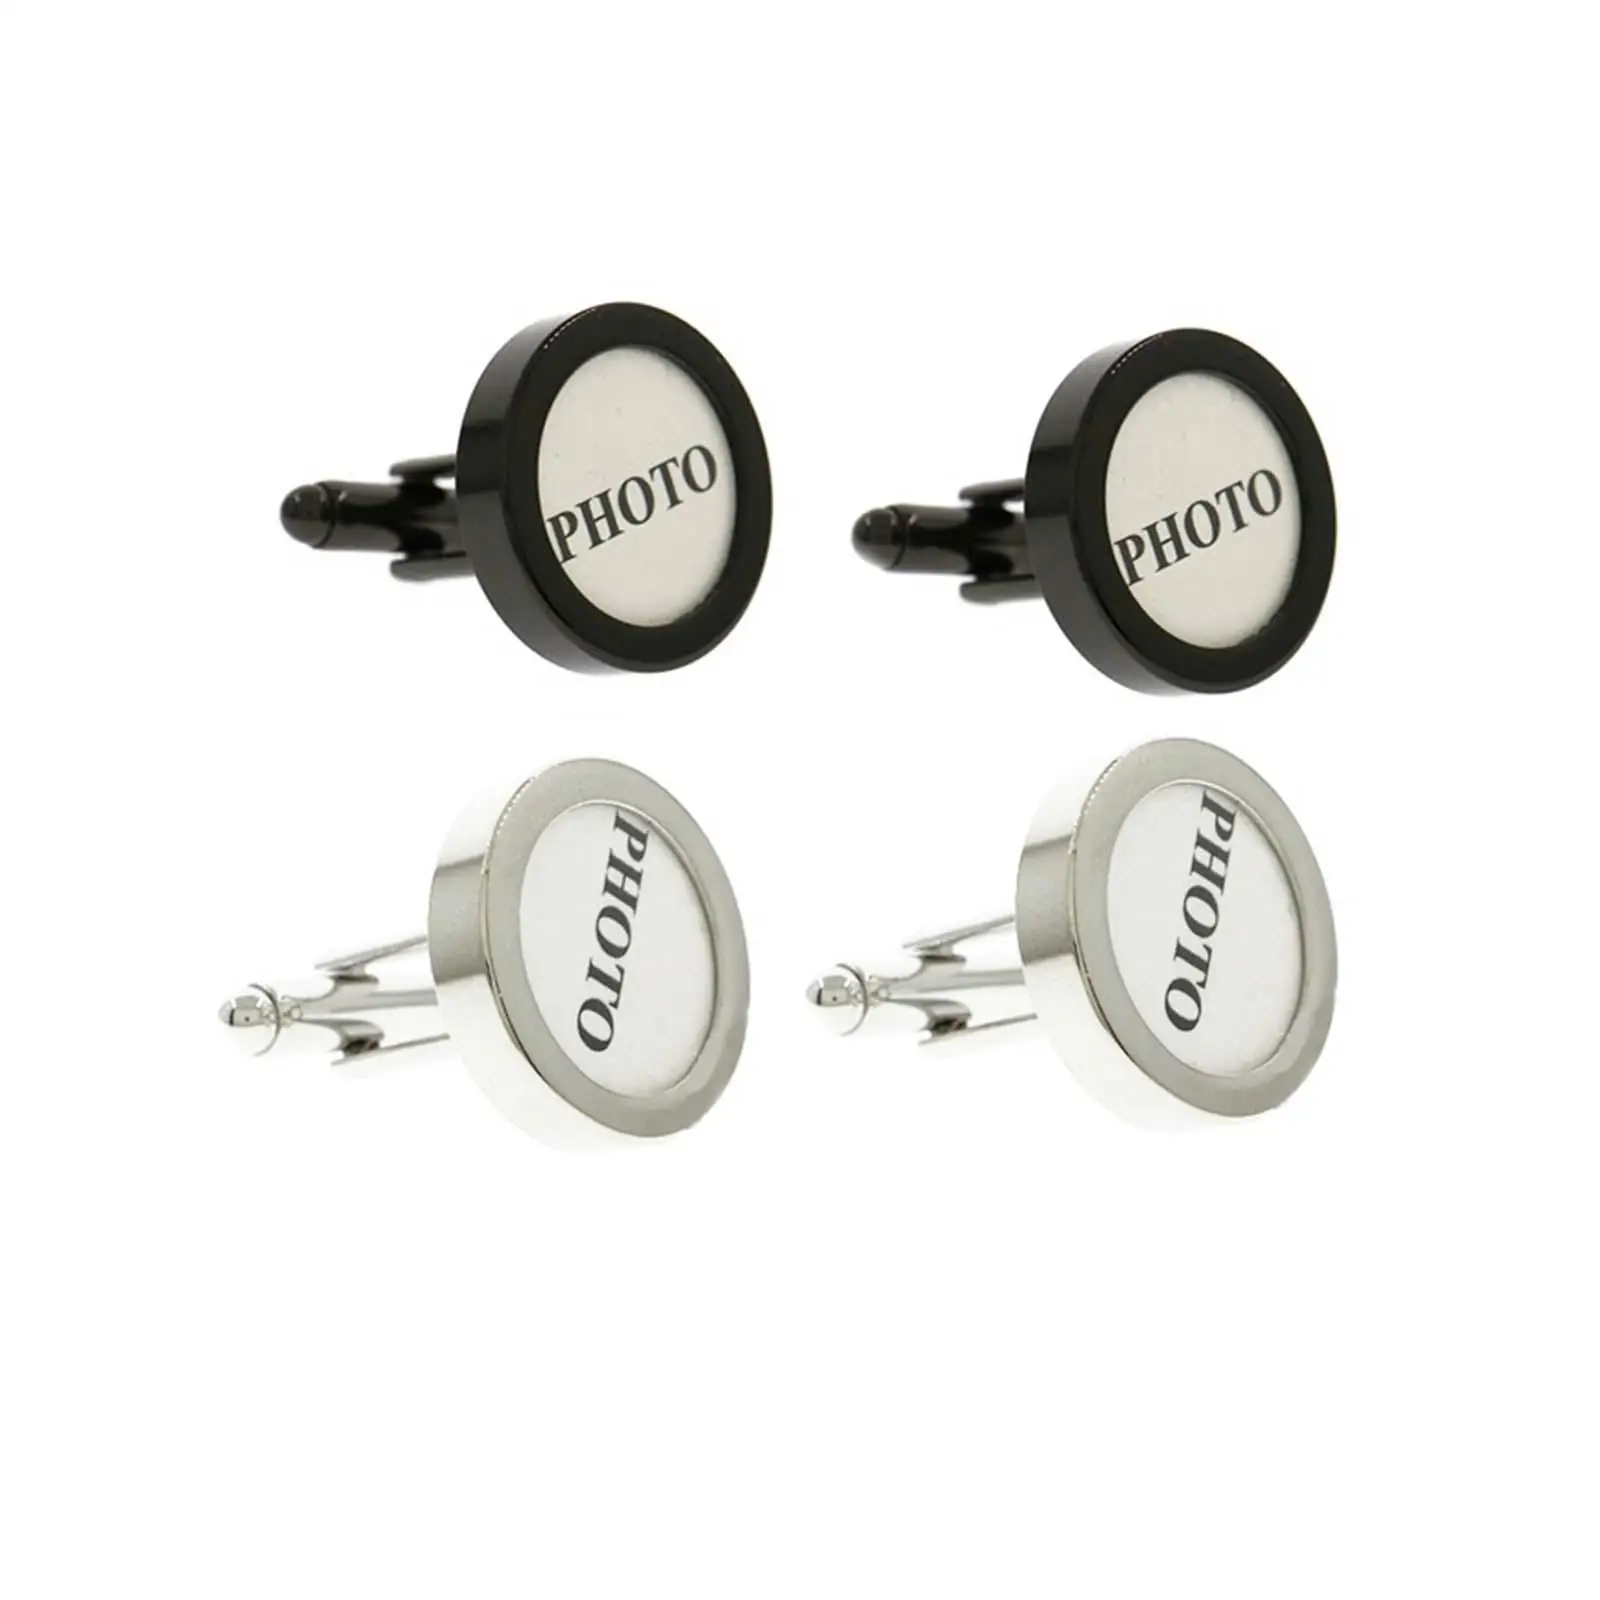 2 Pieces Metal Cufflinks Shirt Accessories Screw Twist Shirt Cuff Links for Daily Clothing Banquet suits Graduation Party